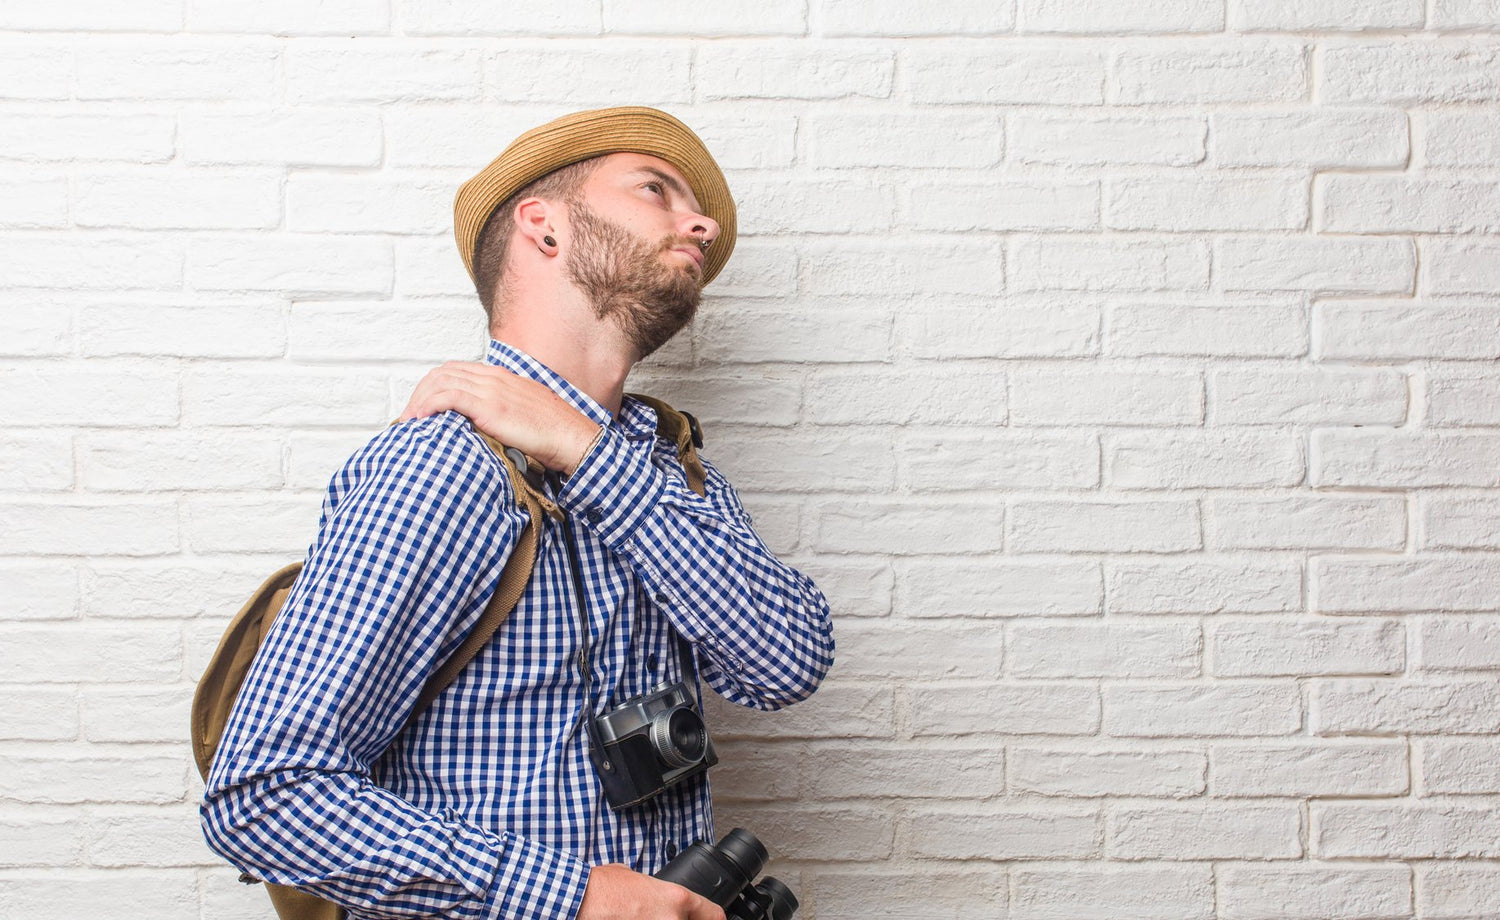 Pain-Free Photography: 7 Ways to Prevent Neck and Back Strain - Cotton Camera Carrying Systems